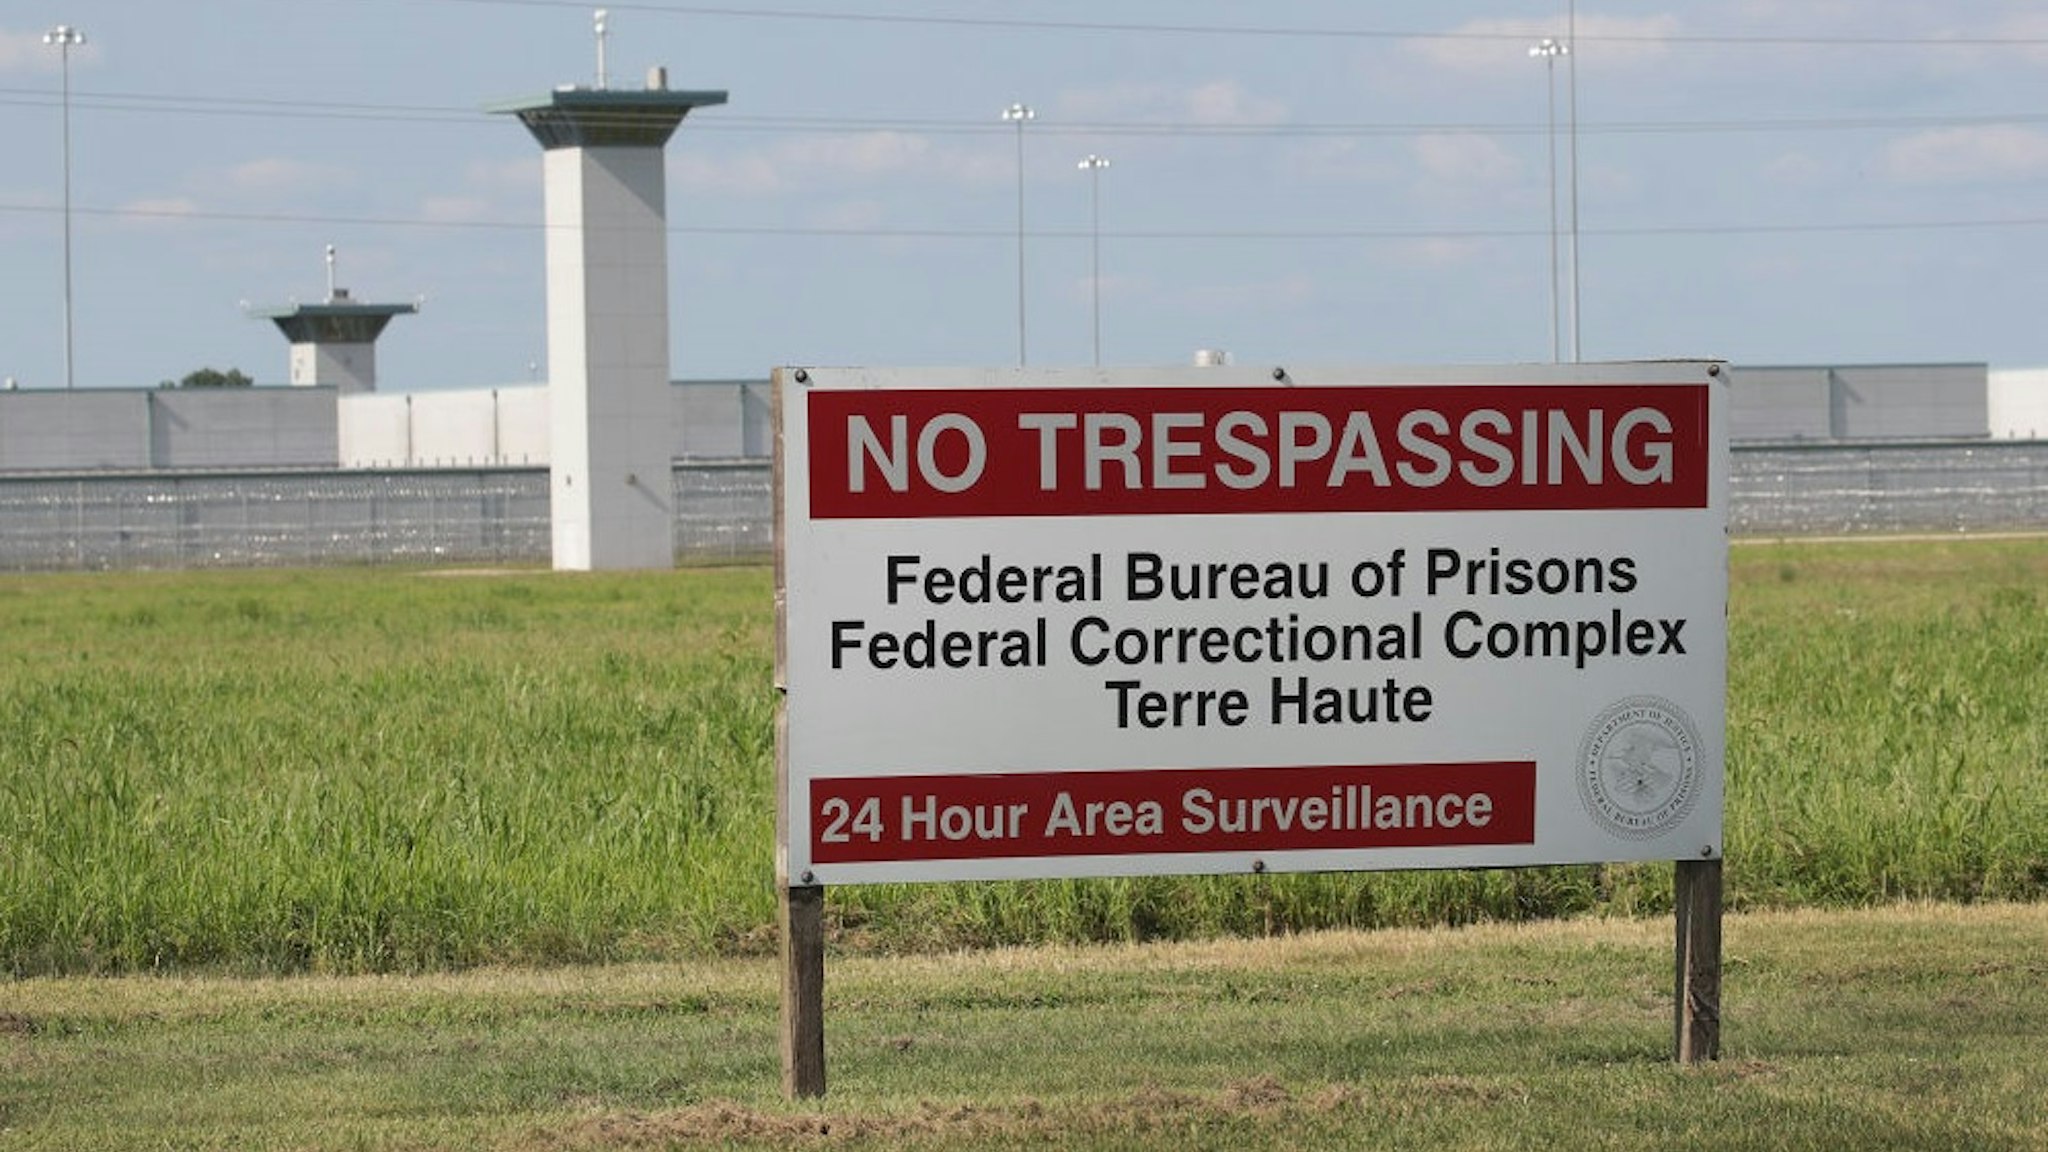 TERRE HAUTE, INDIANA - JULY 25: A sign warns away trespassers at the Federal Correctional Complex Terre Haute on July 25, 2019 in Terre Haute, Indiana. Today U.S. Attorney William Barr announced that the federal government would resume executing prisoners after a two-year hiatus.The first five are scheduled to be executed at the Terre Haute prison between December 9 this year and January 15, 2020. The federal government has executed four prisoners since 1960. (Photo by Scott Olson/Getty Images)